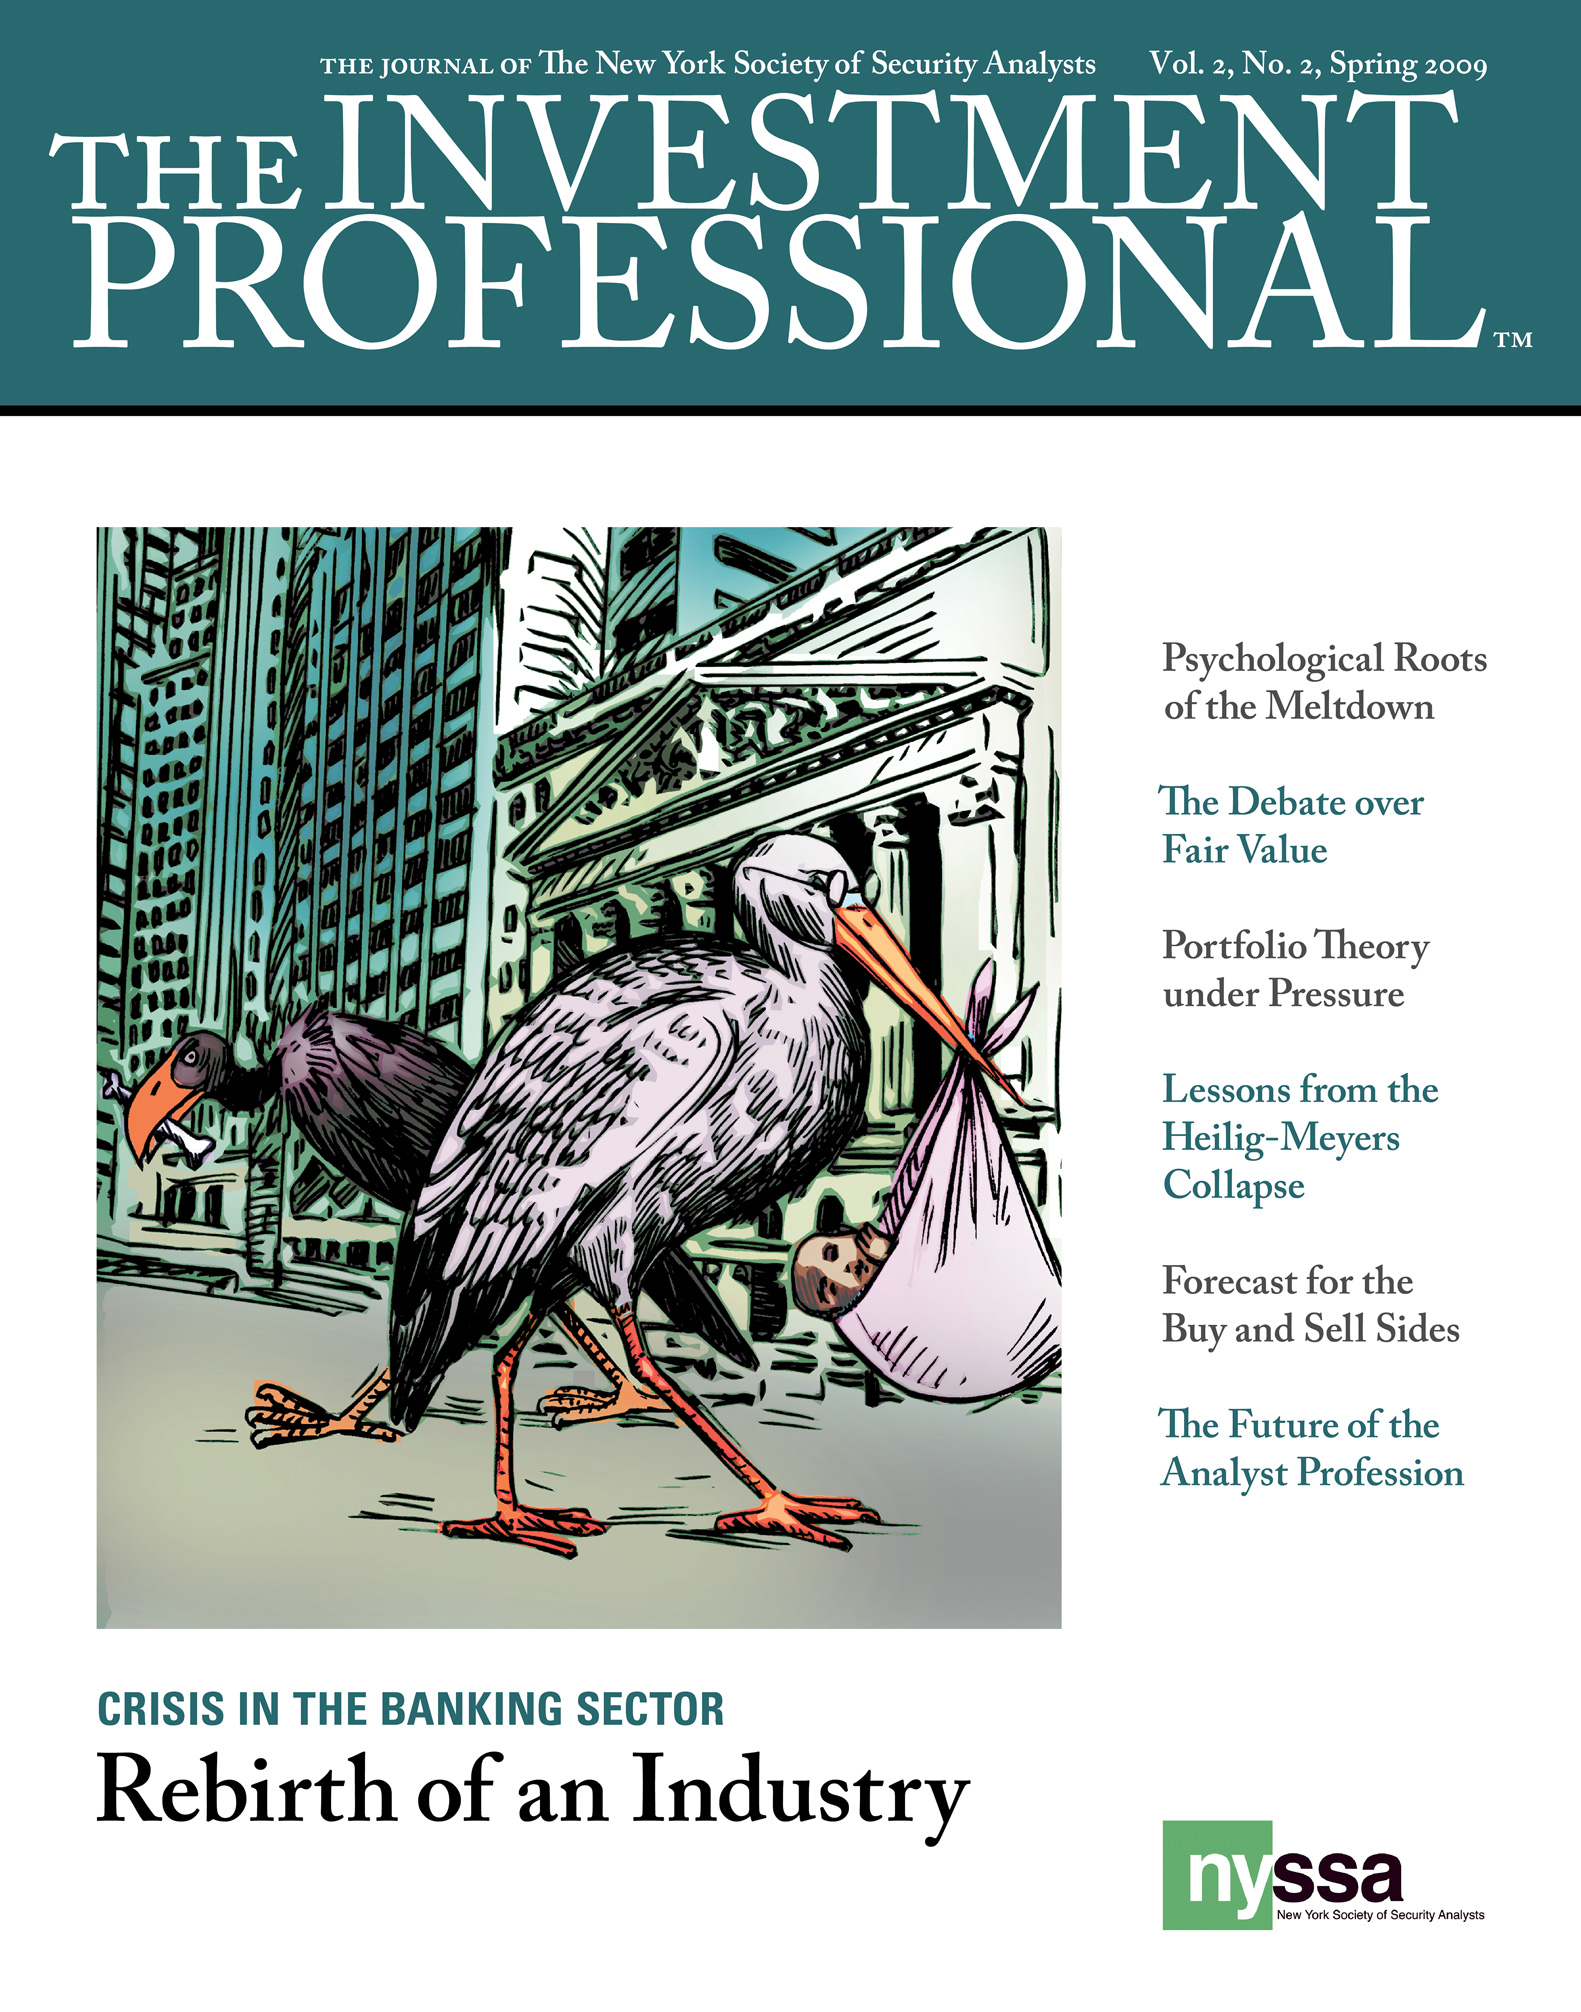 Cover of The Investment Professional with an illustration of a stork and a vulture for the story titled 'Crisis in the Banking Sector: Rebirth of an Industry.'